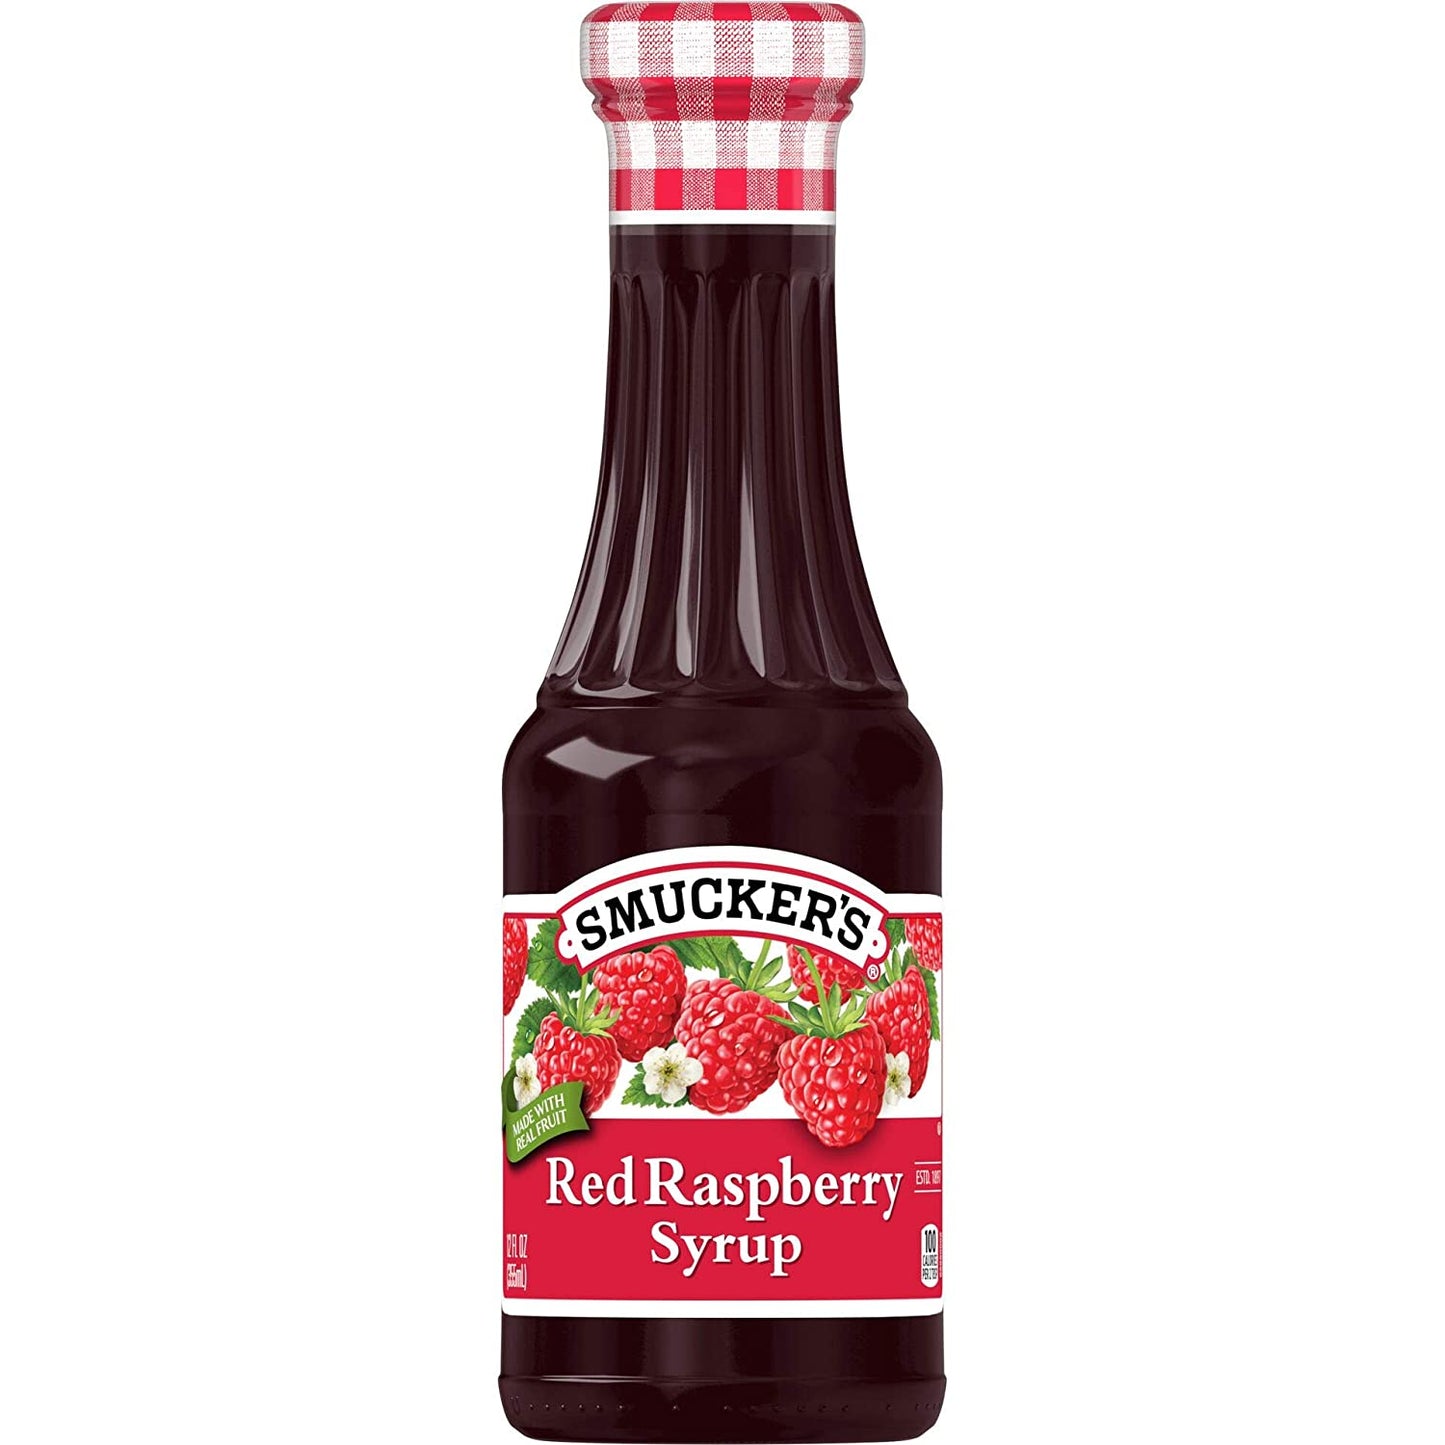 Smucker's Red Raspberry Syrup, 12 Ounces (Pack of 6)